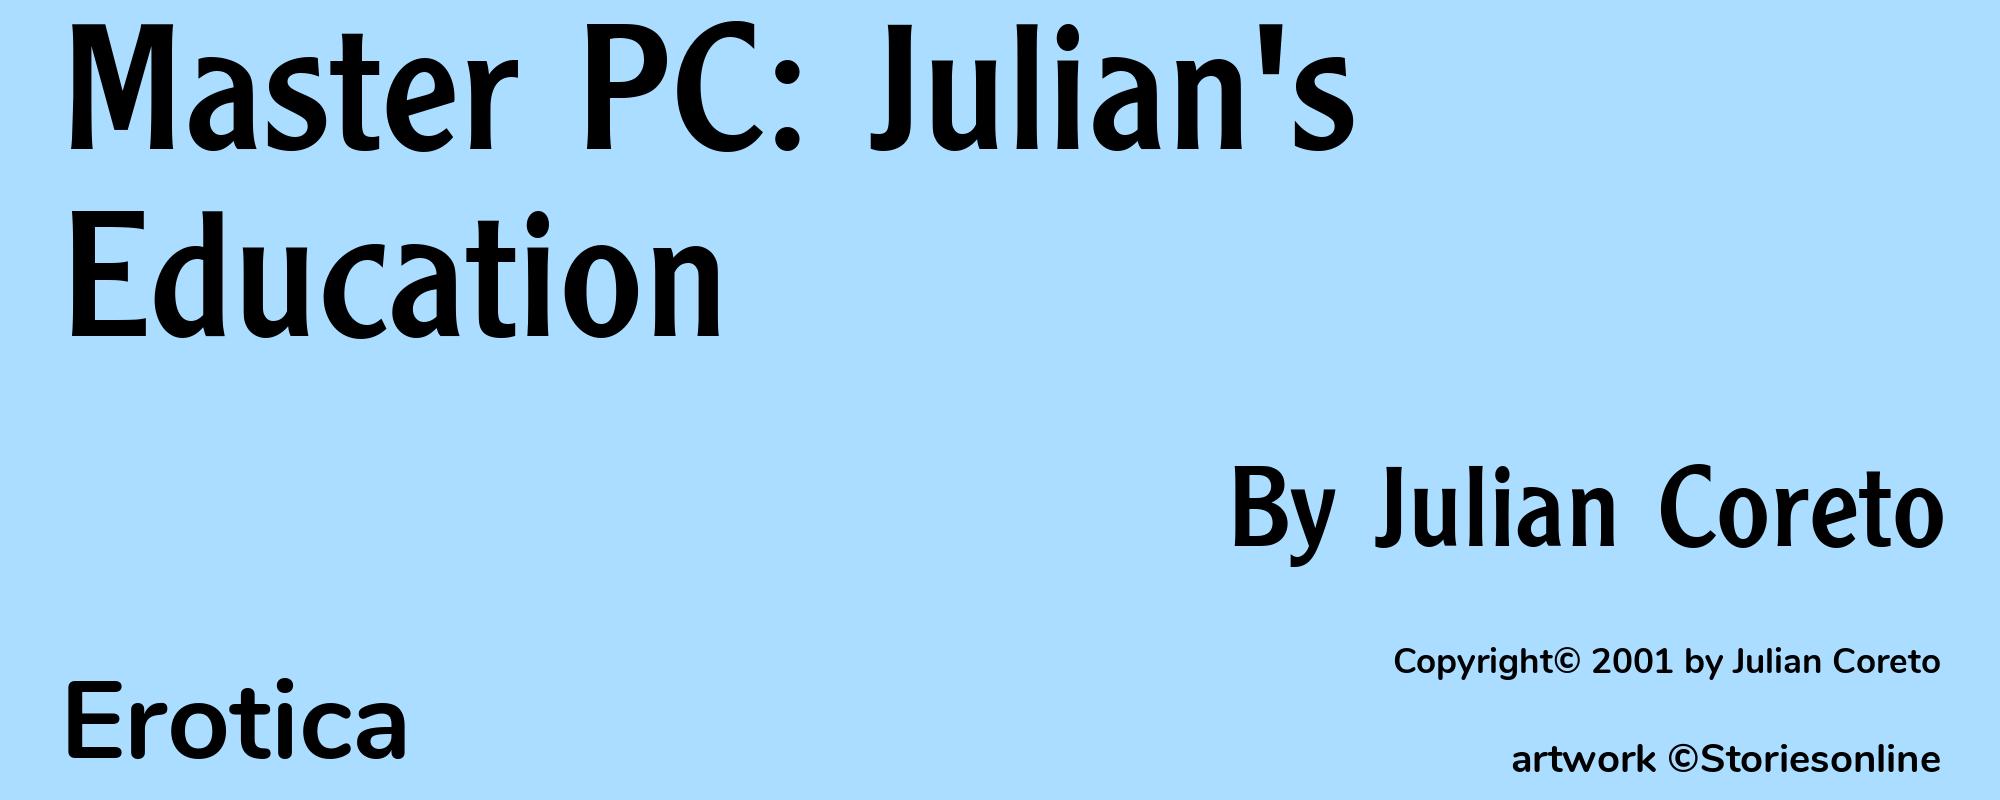 Master PC: Julian's Education - Cover